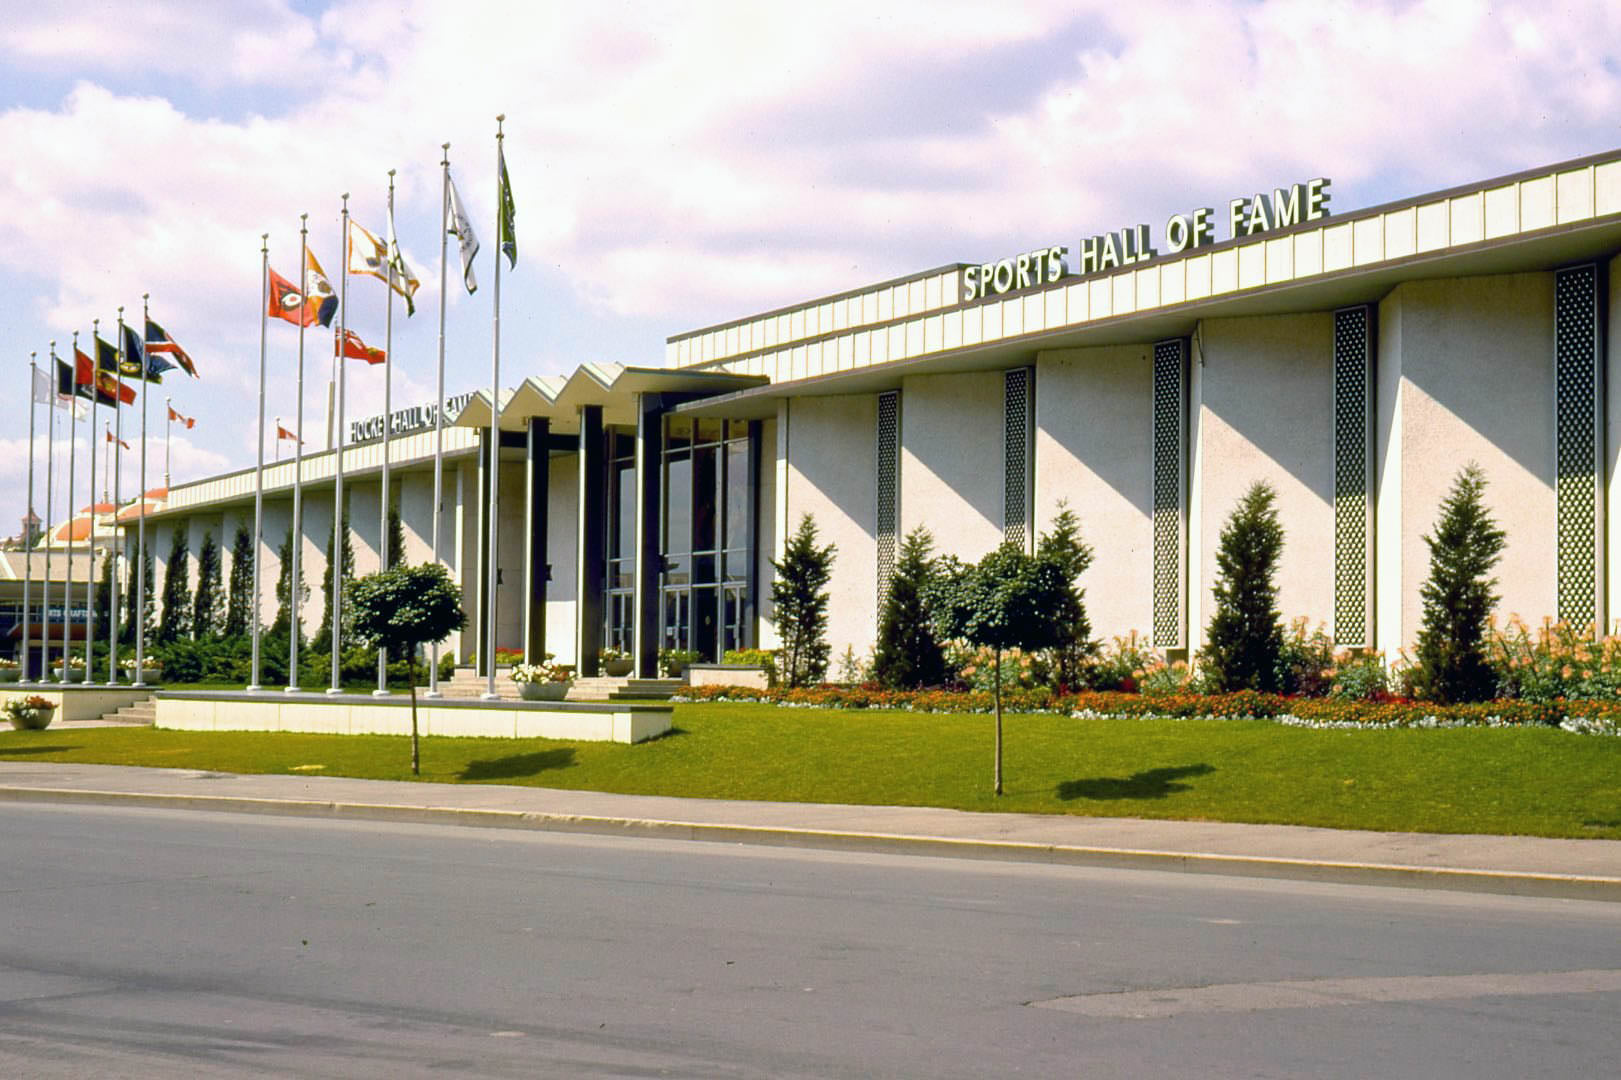 Sports Hall of Fame, CNE grounds, 1968